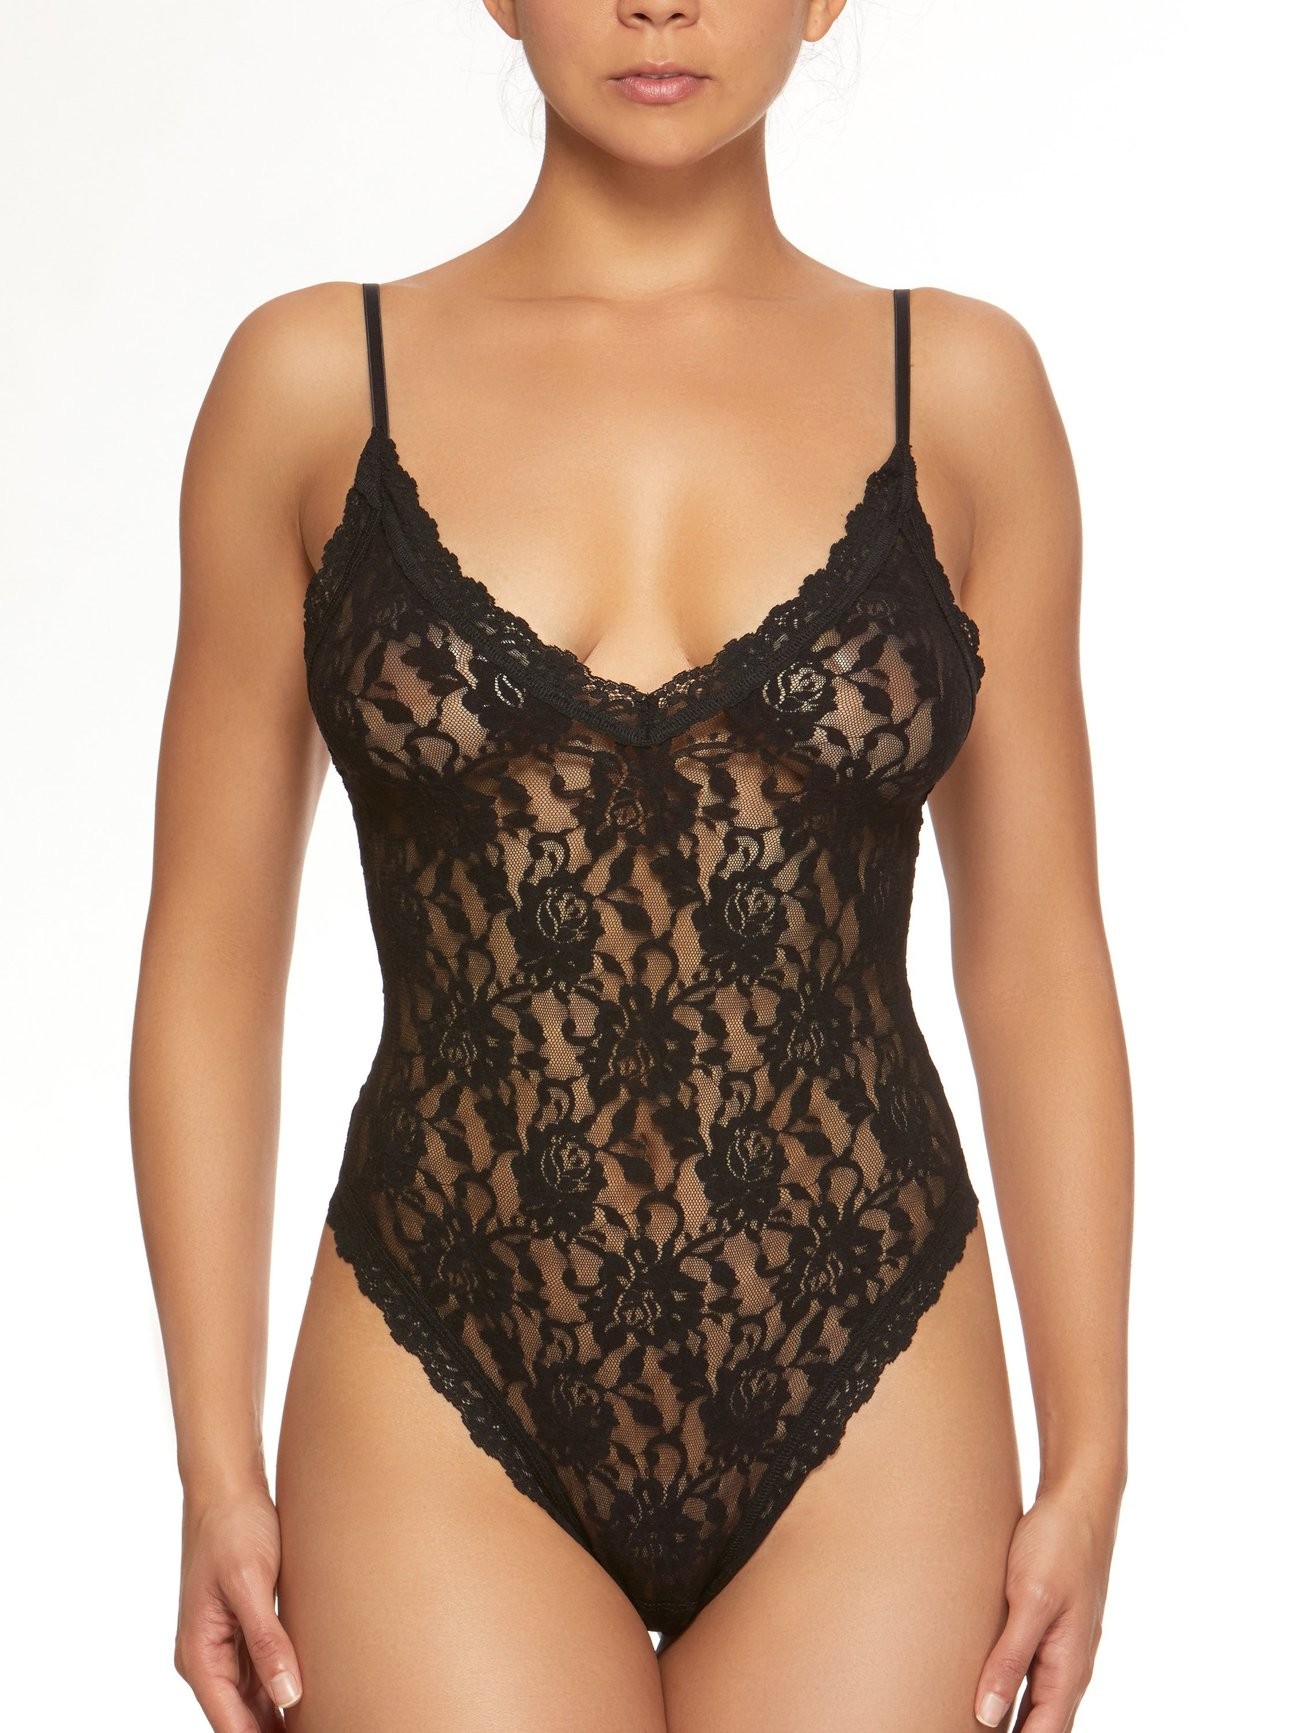 BRANDS \ Hanky Panky – Forever Yours Lingerie